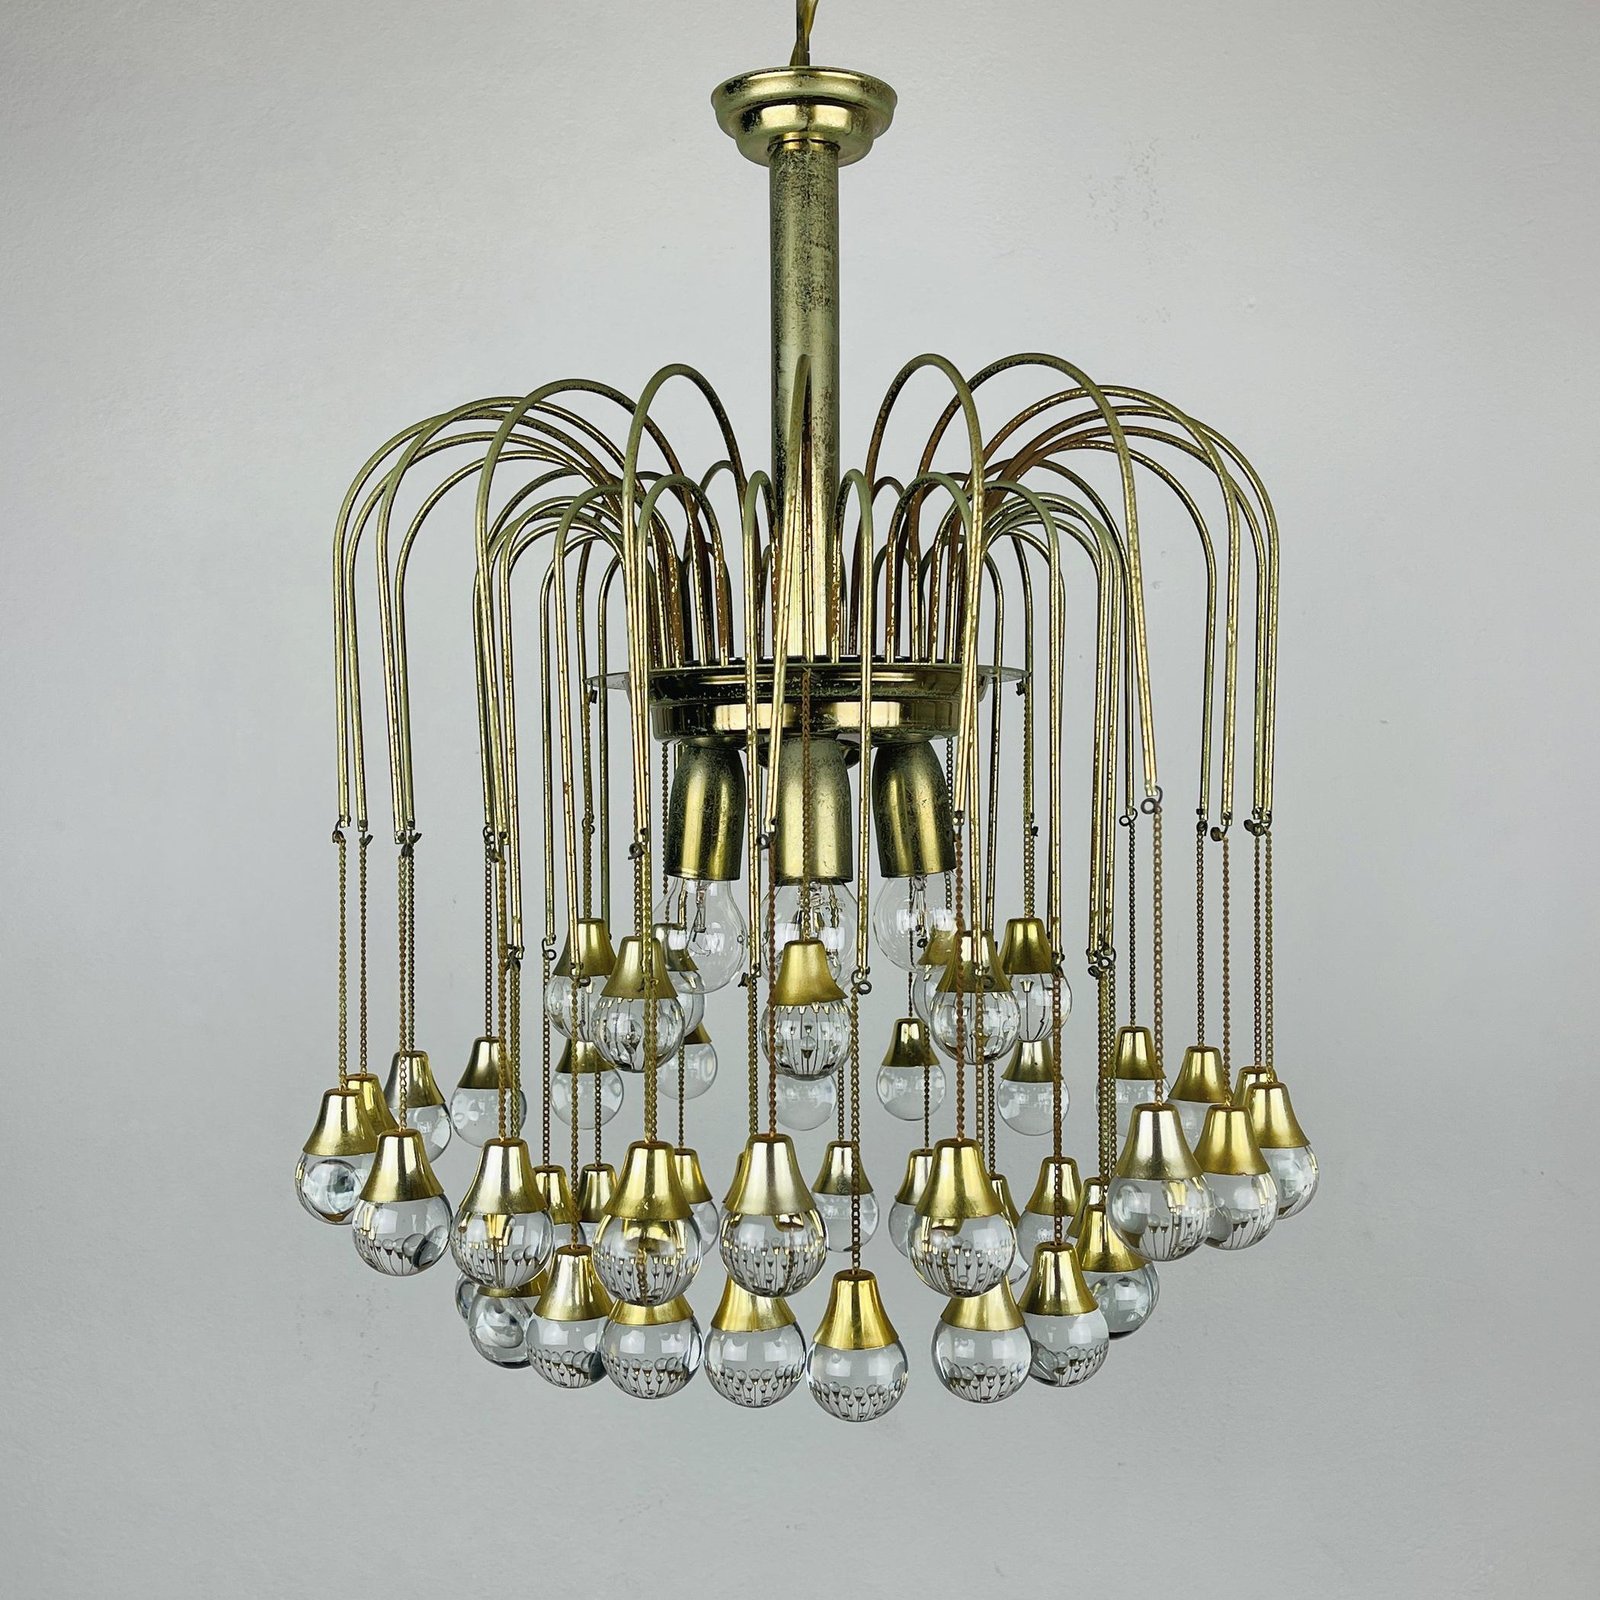 Vintage cascade glass chandelier Italy 1960s Brass and 48 glass balls